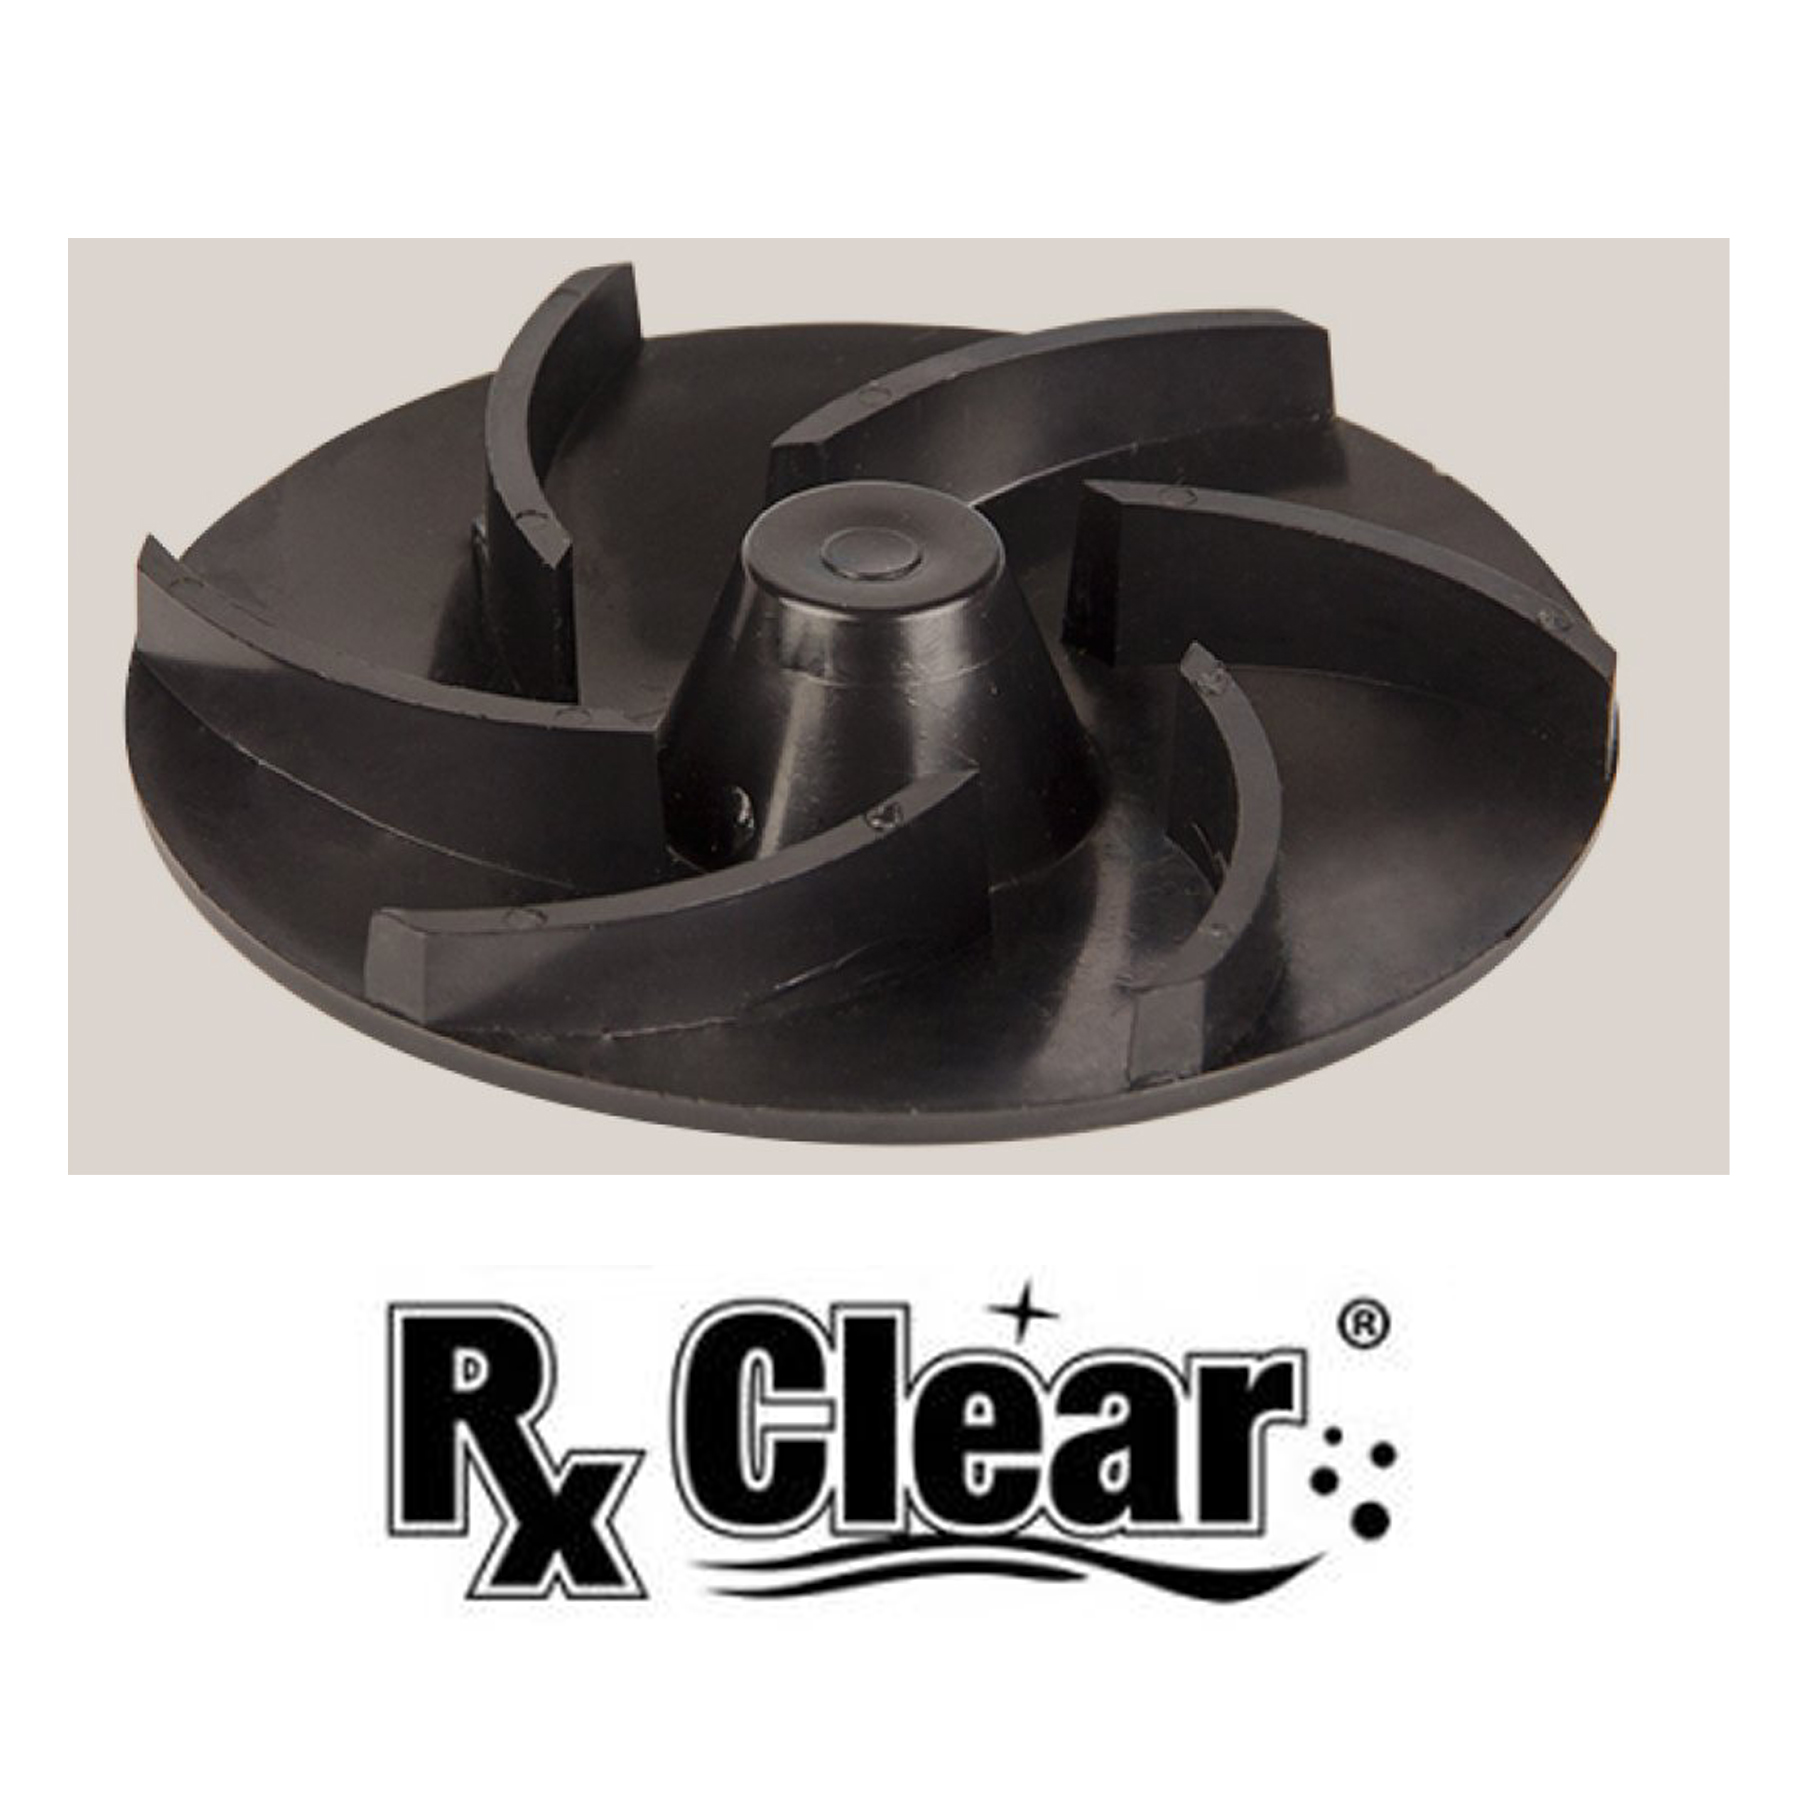 Rx Clear Impeller for the Little Niagara Swimming Pool